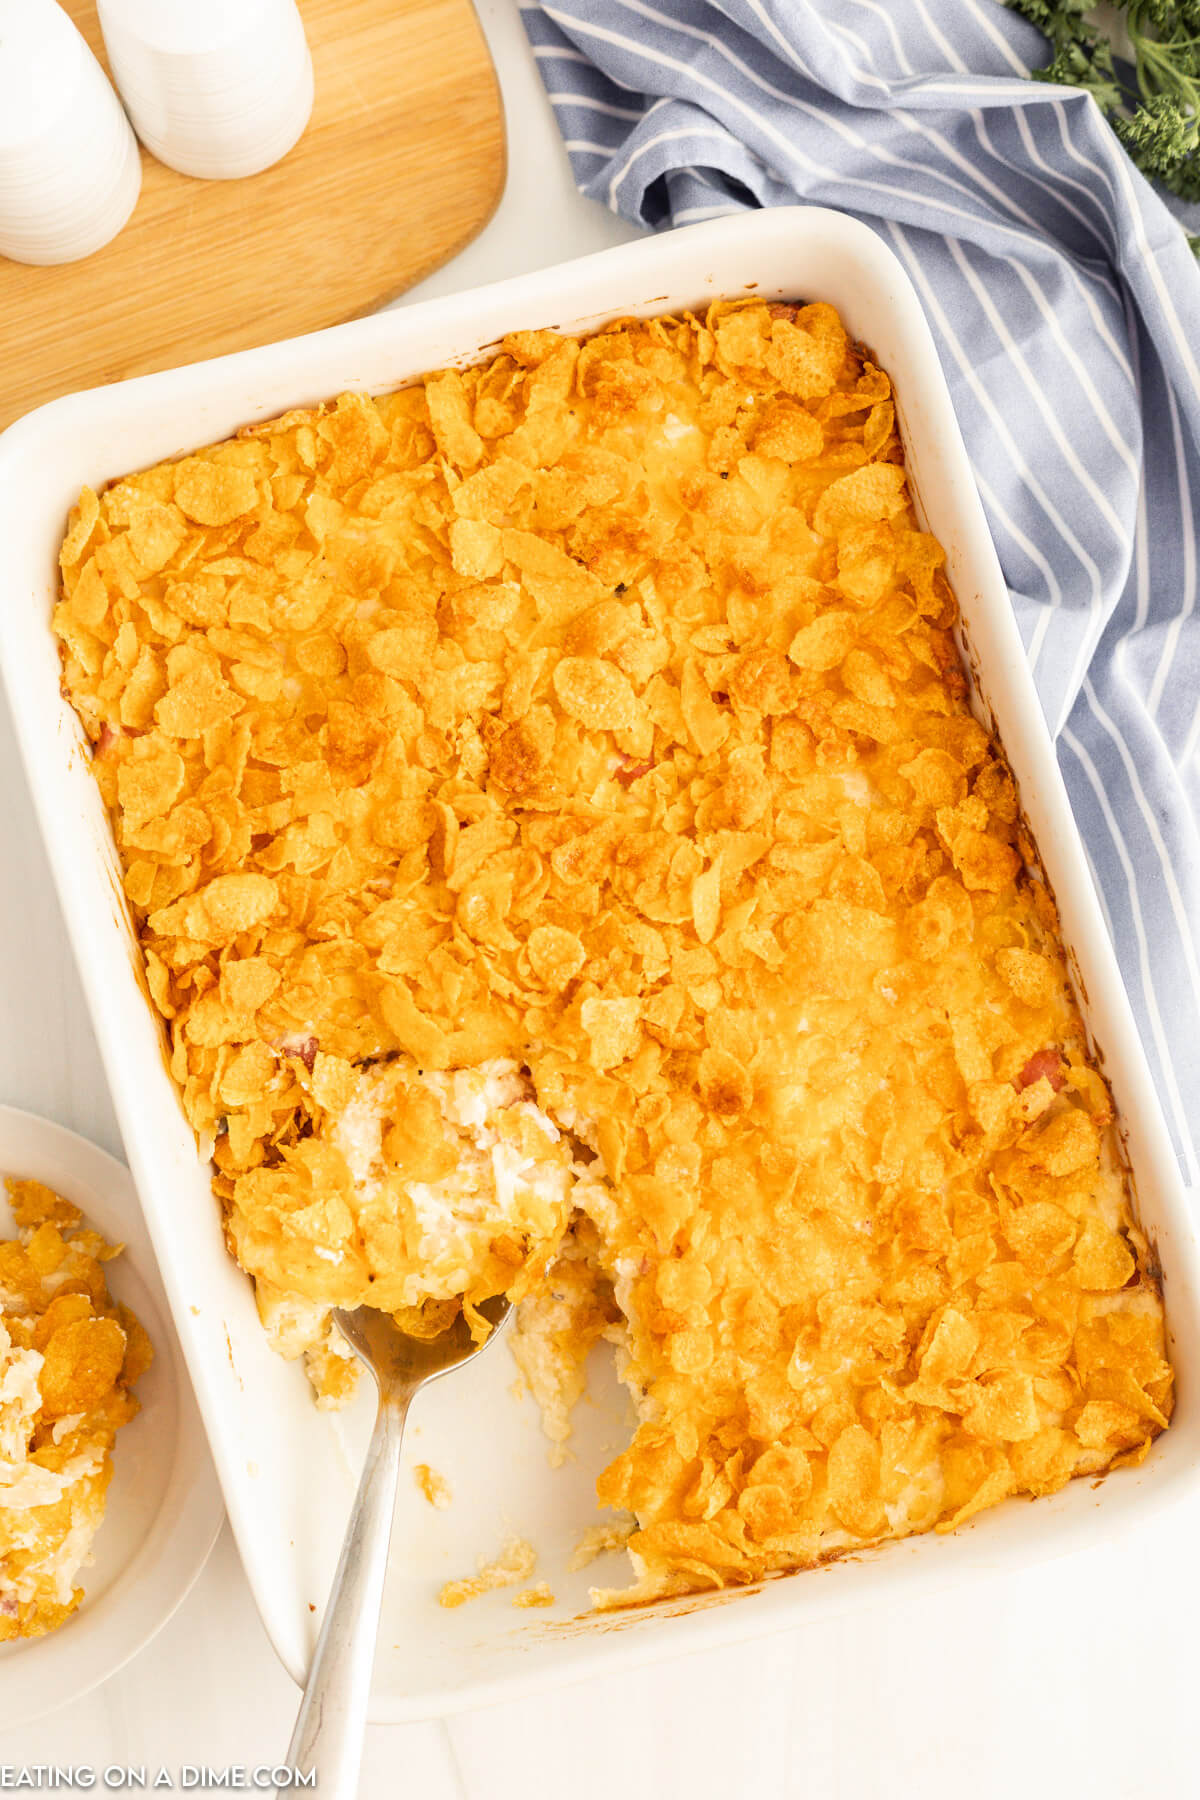 Funeral potatoes in a baking dish with a spoon